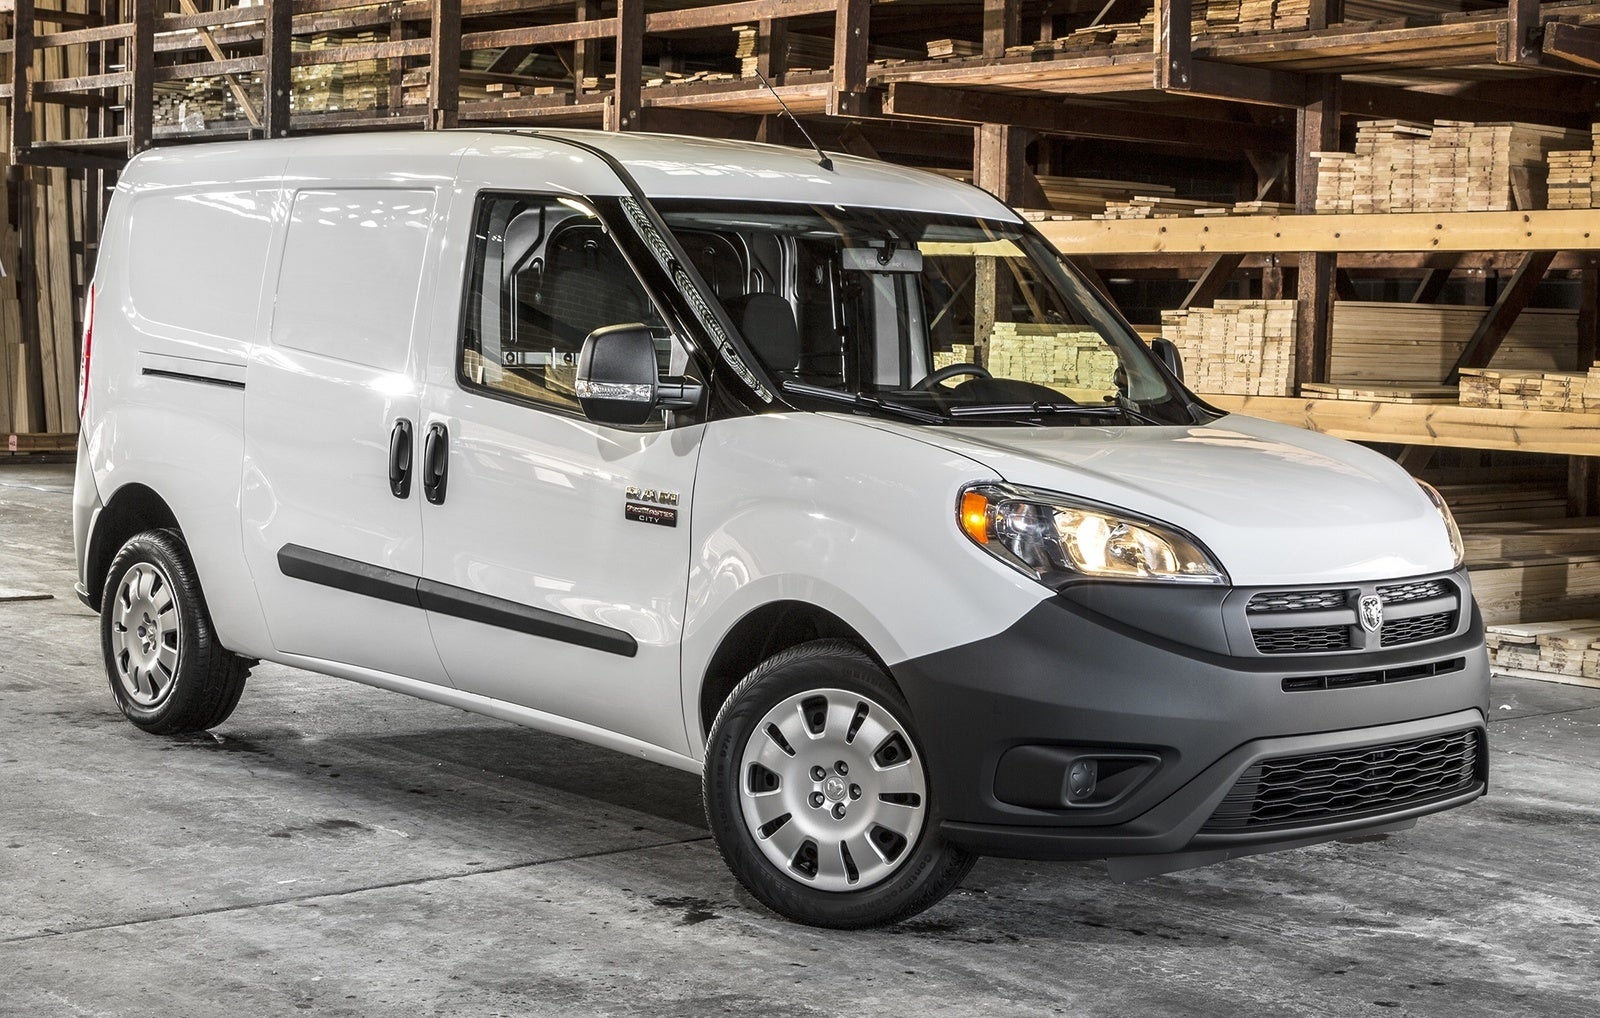 2015 ram promaster city for sale